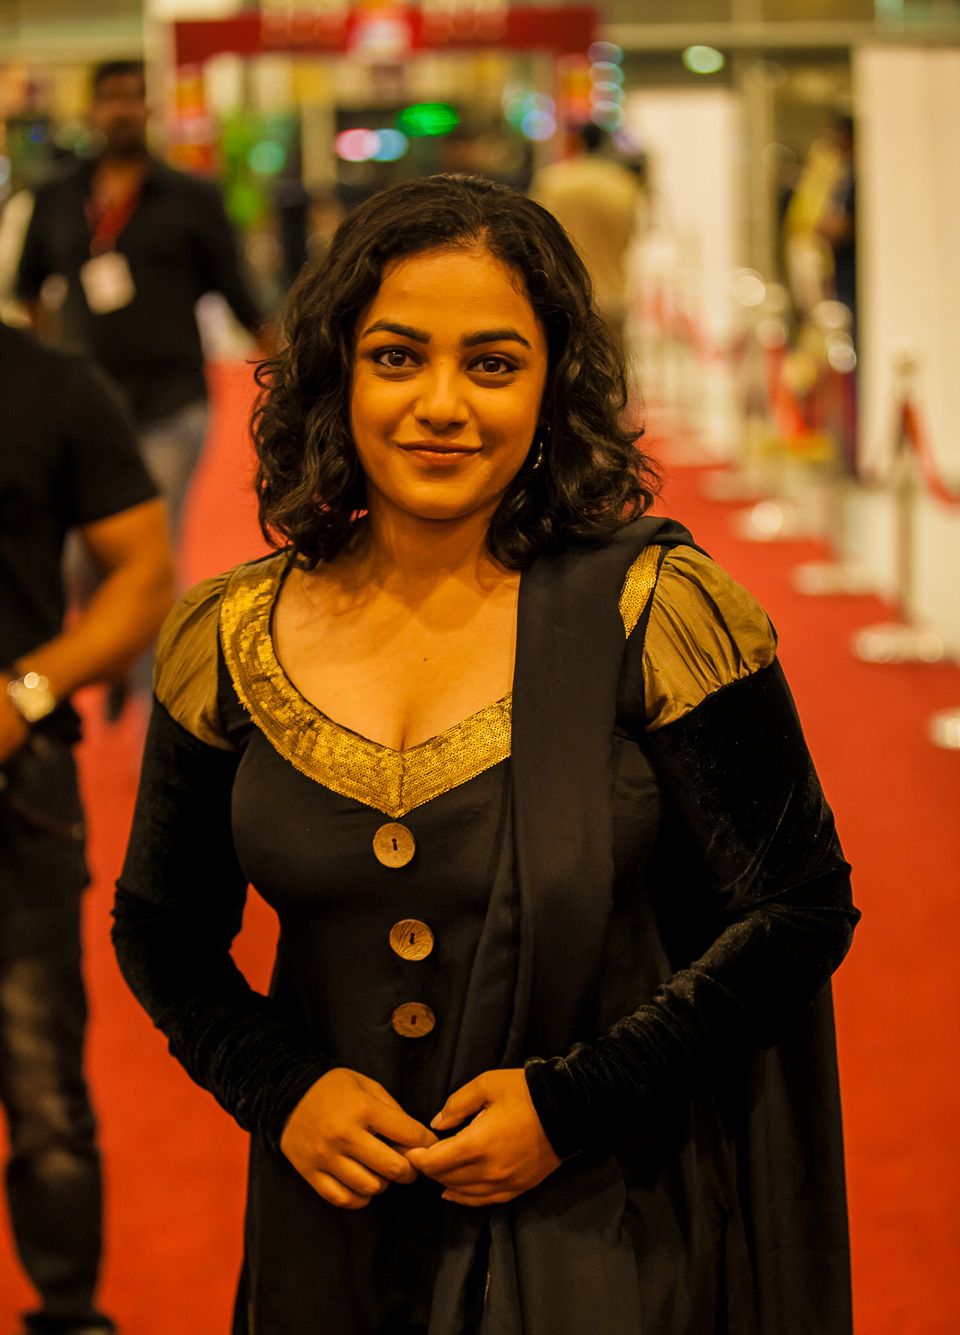 50 Nithya Menen Cute Pictures And HD Wallpapers - IndiaWords.com